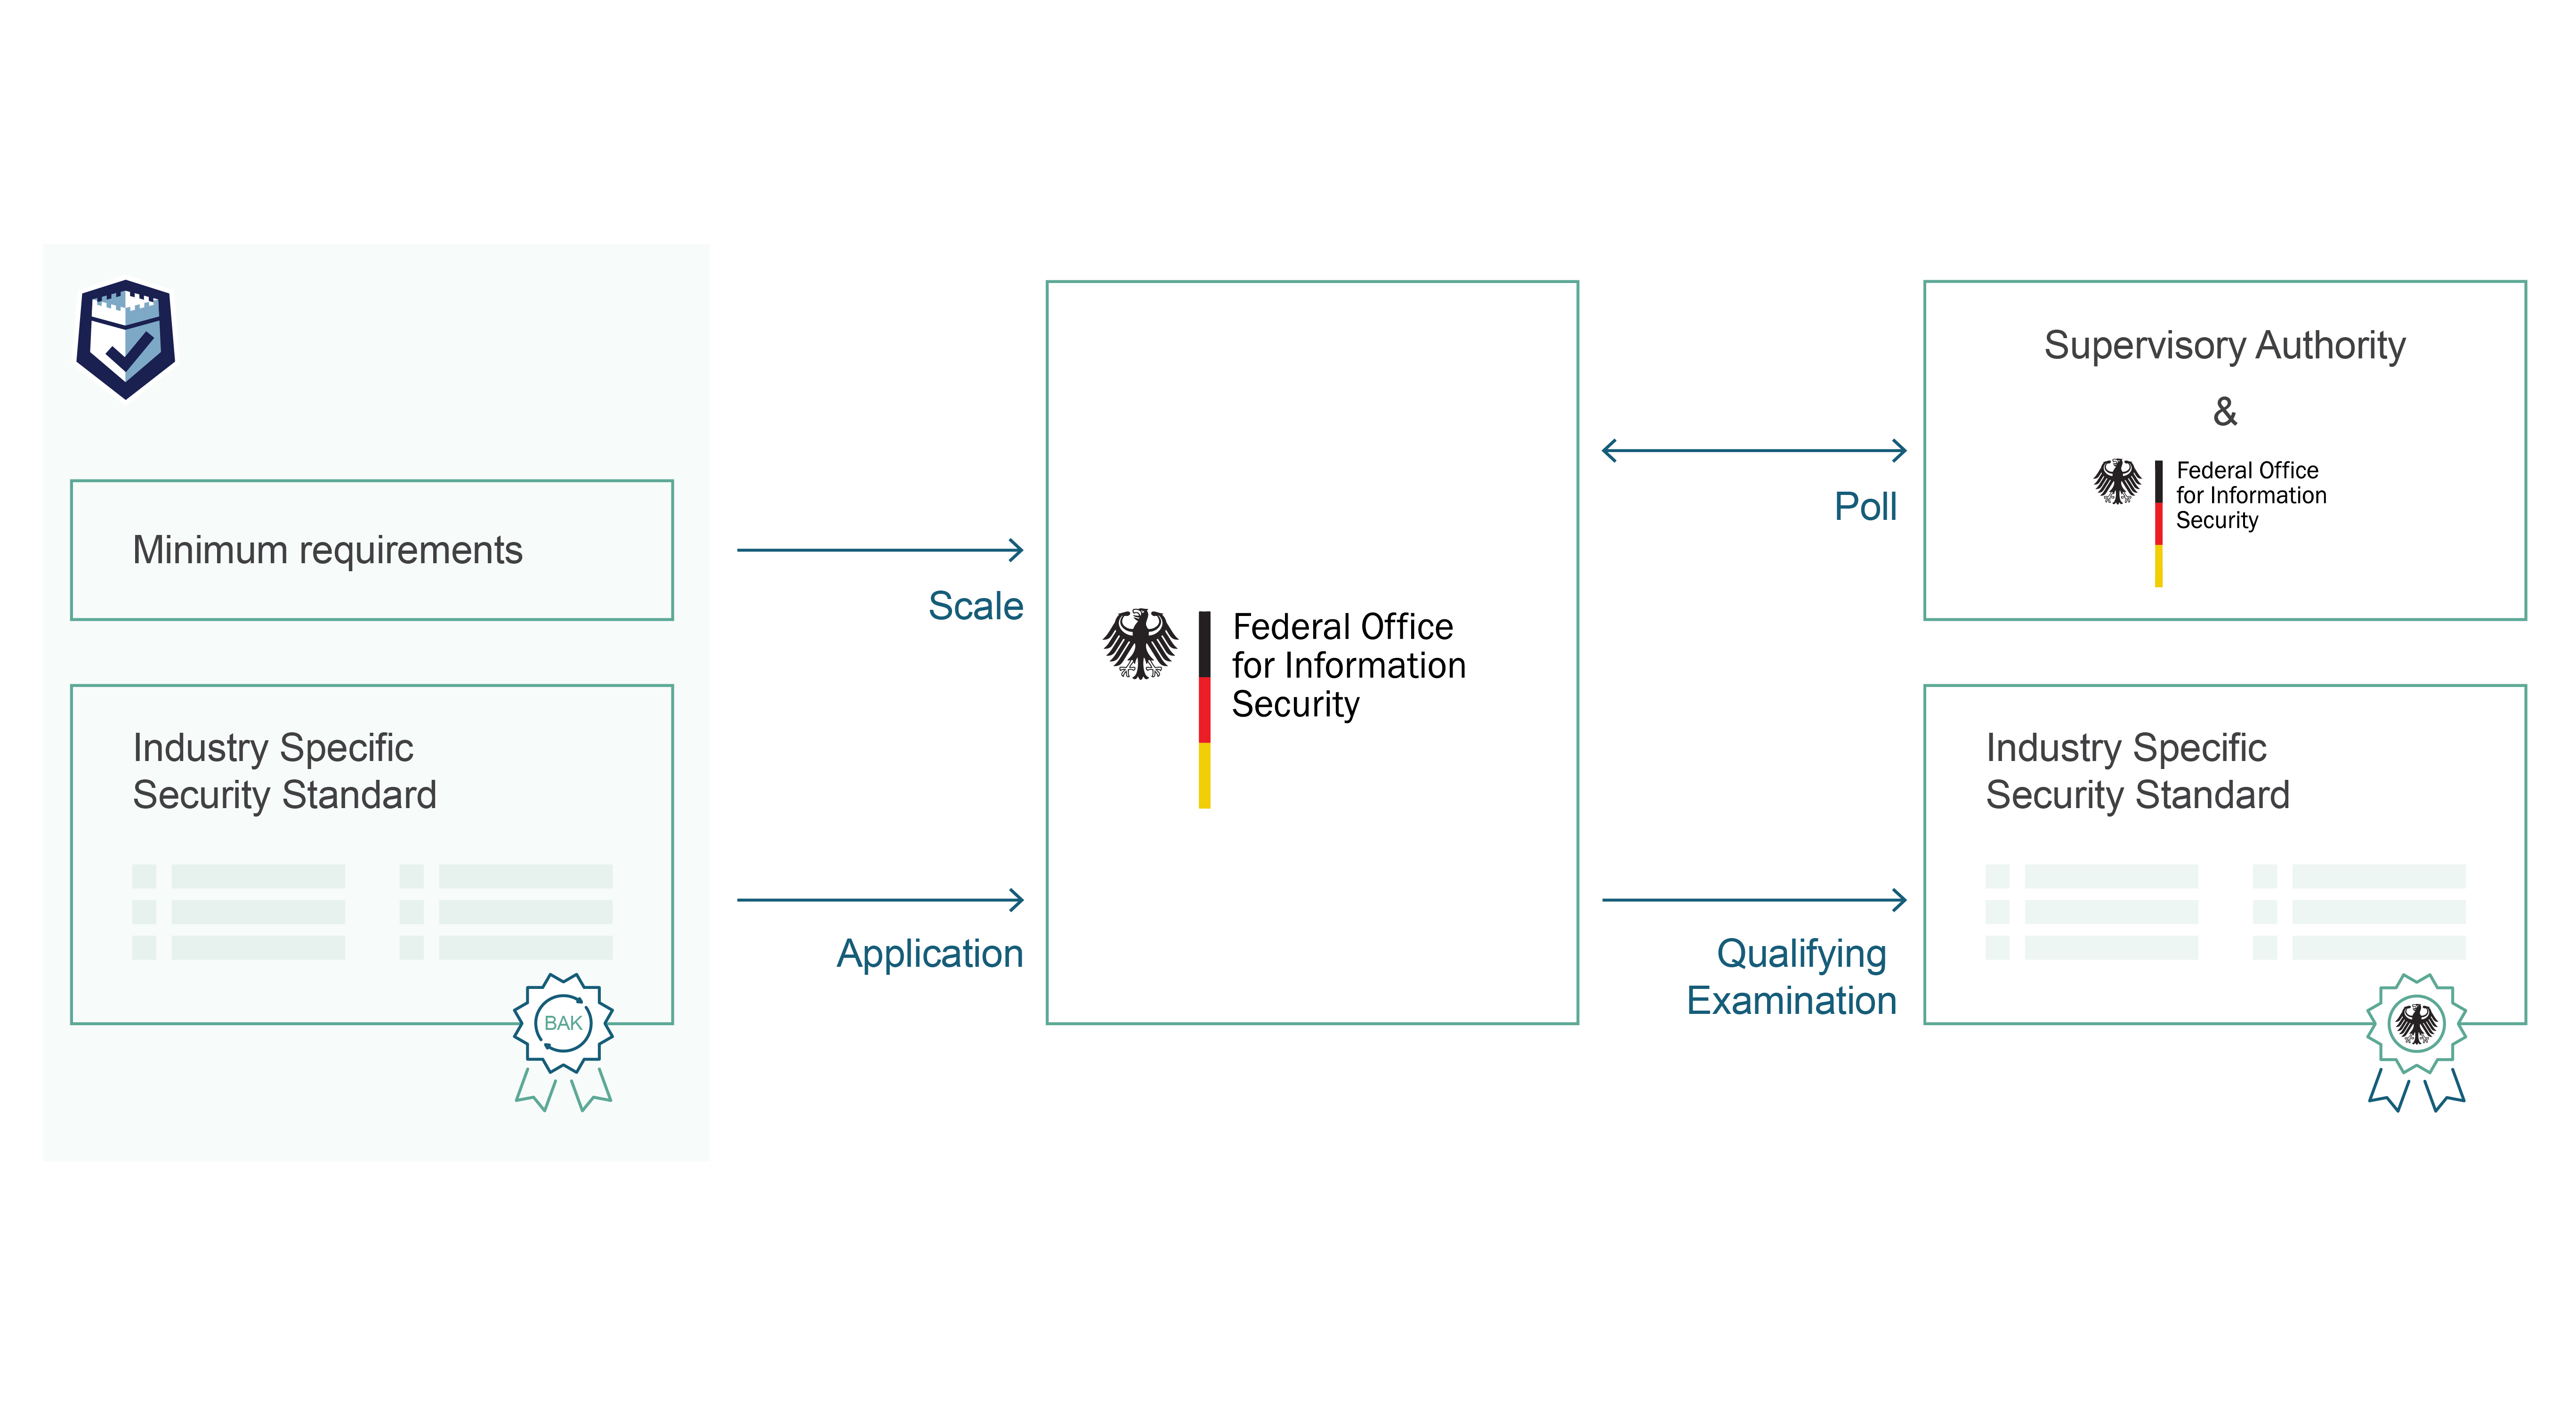 Critical Infrastructure Protection Model By Federal Office of Information Technology in Germany